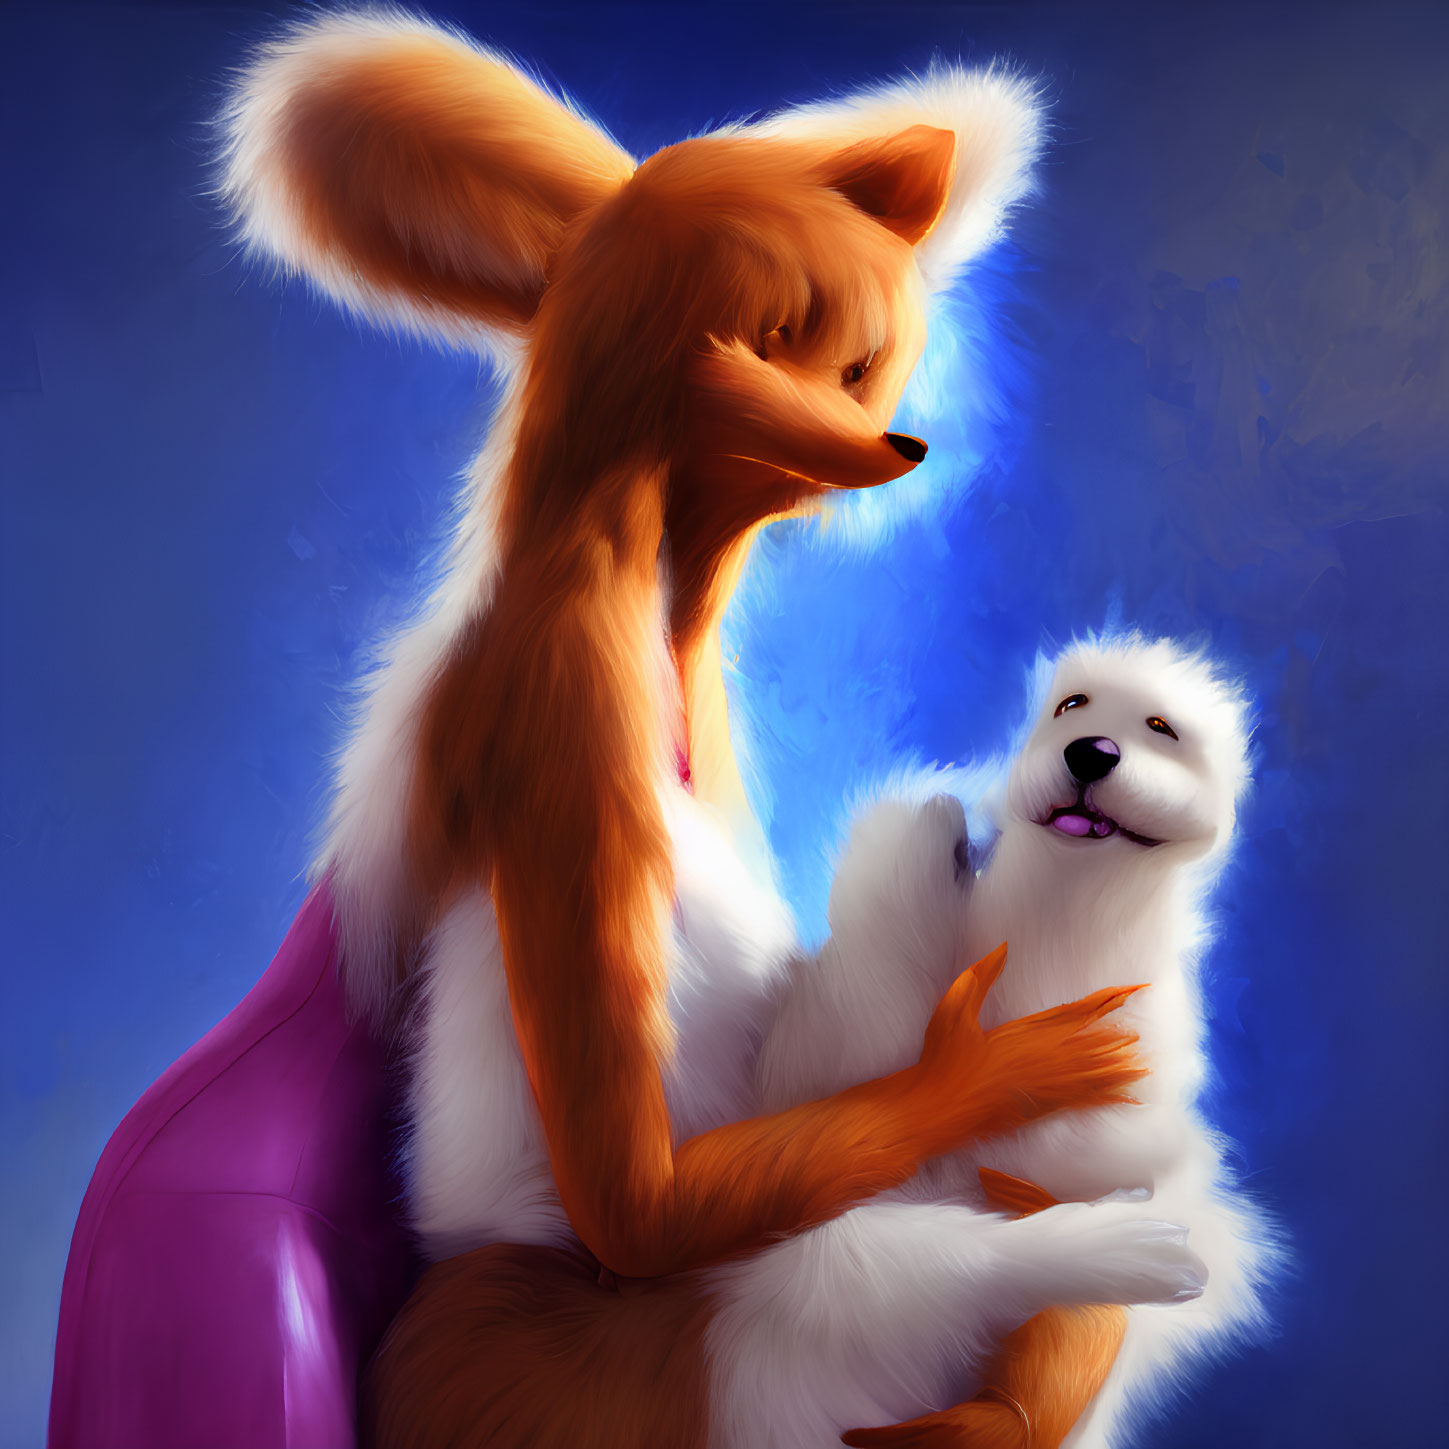 Humanoid fox in purple garment holding fluffy white dog on blue background